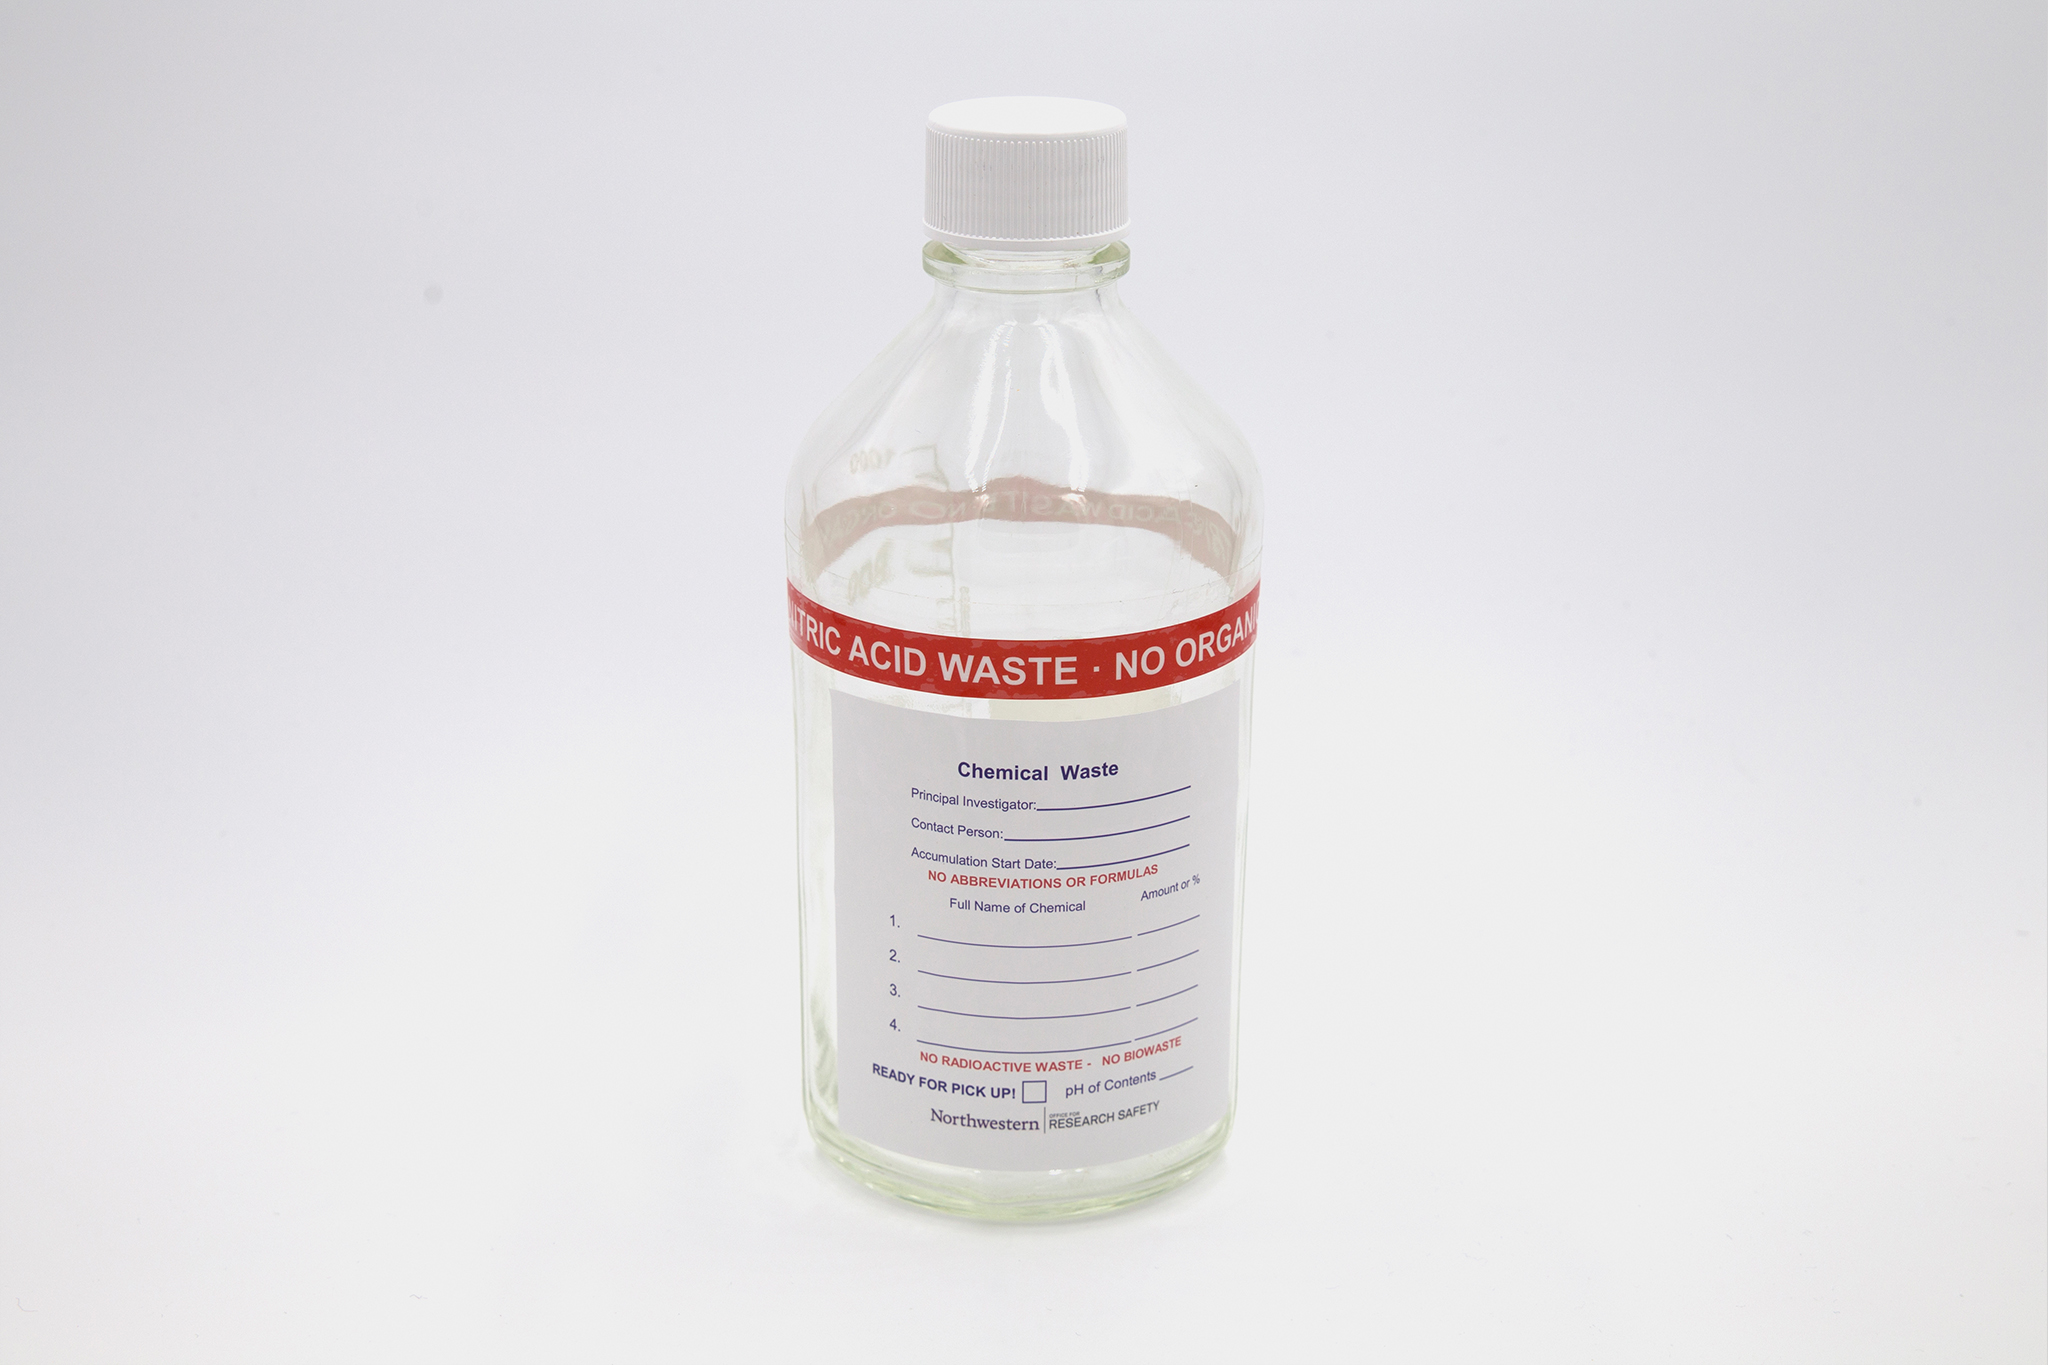 Glass bottle with nitric acid label